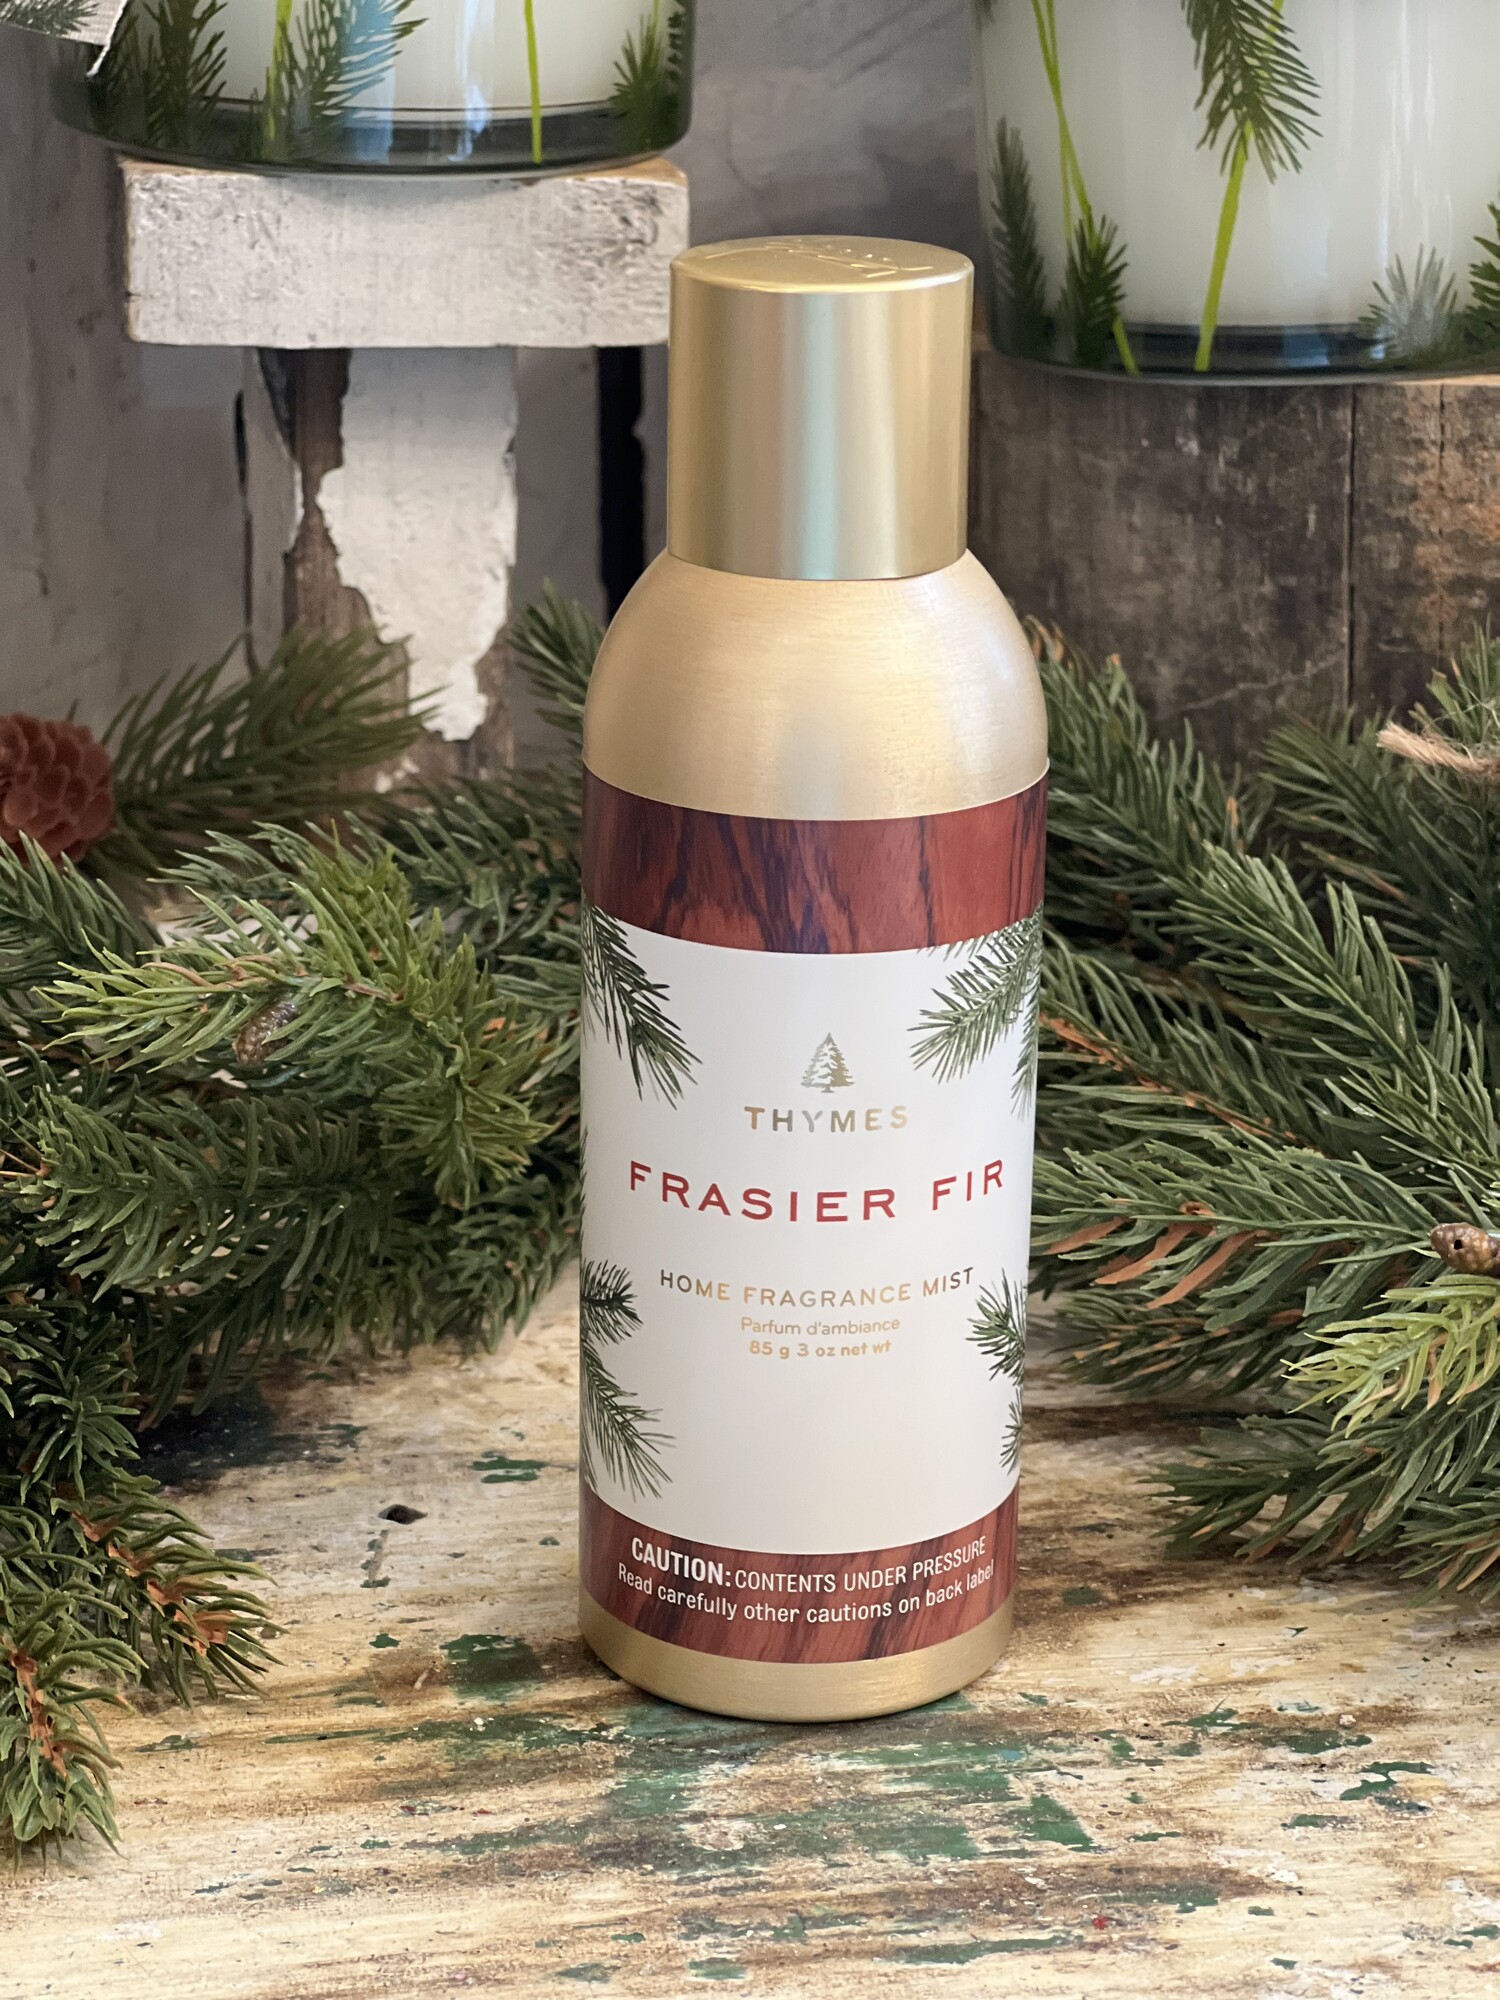 Moutain fresh and glowing with a snap of crisp siberian fir needles, cedarwood and relaxing sandlewood. This highly aromatic mist has such a beautiful scent that smells like a fresh cut Christmas tree but is great to use year round. This mist is 3 ounces